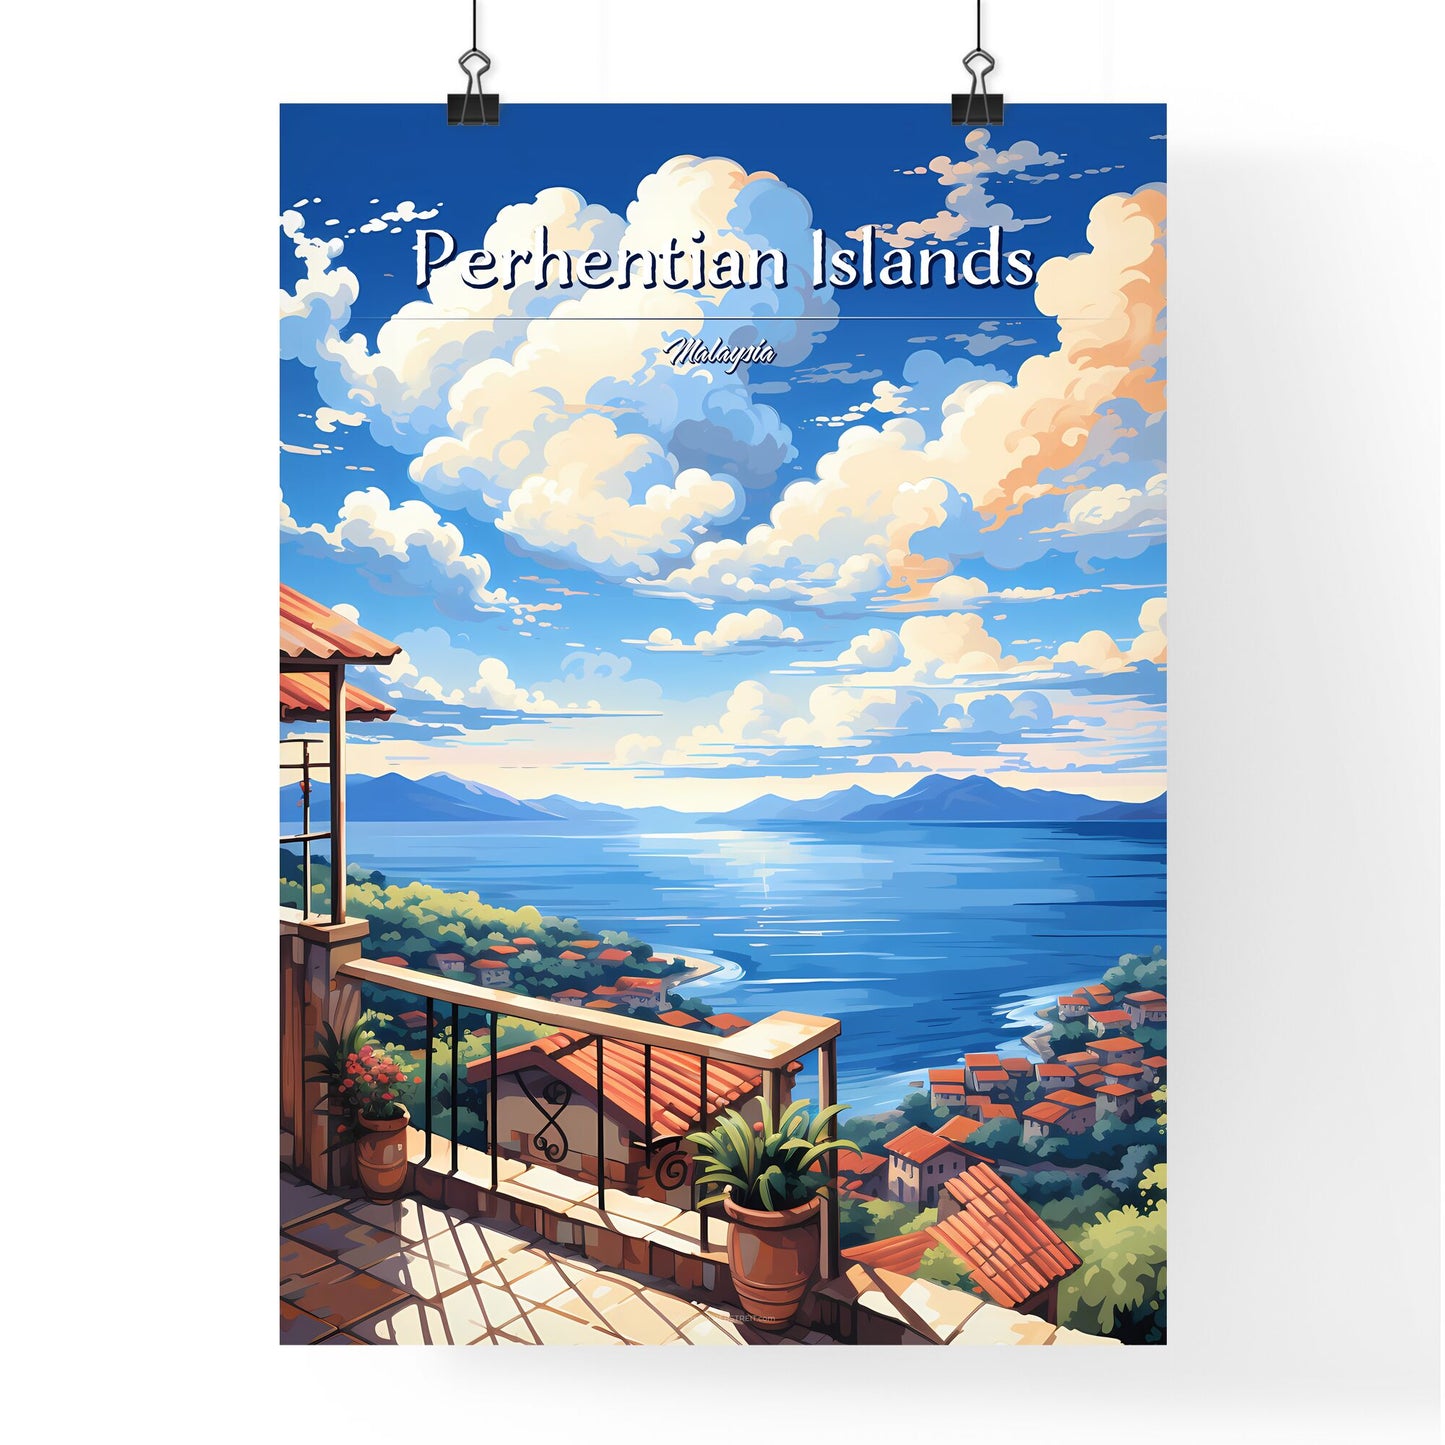 On the roofs of Perhentian Islands, Malaysia - Art print of a painting of a house overlooking a body of water Default Title